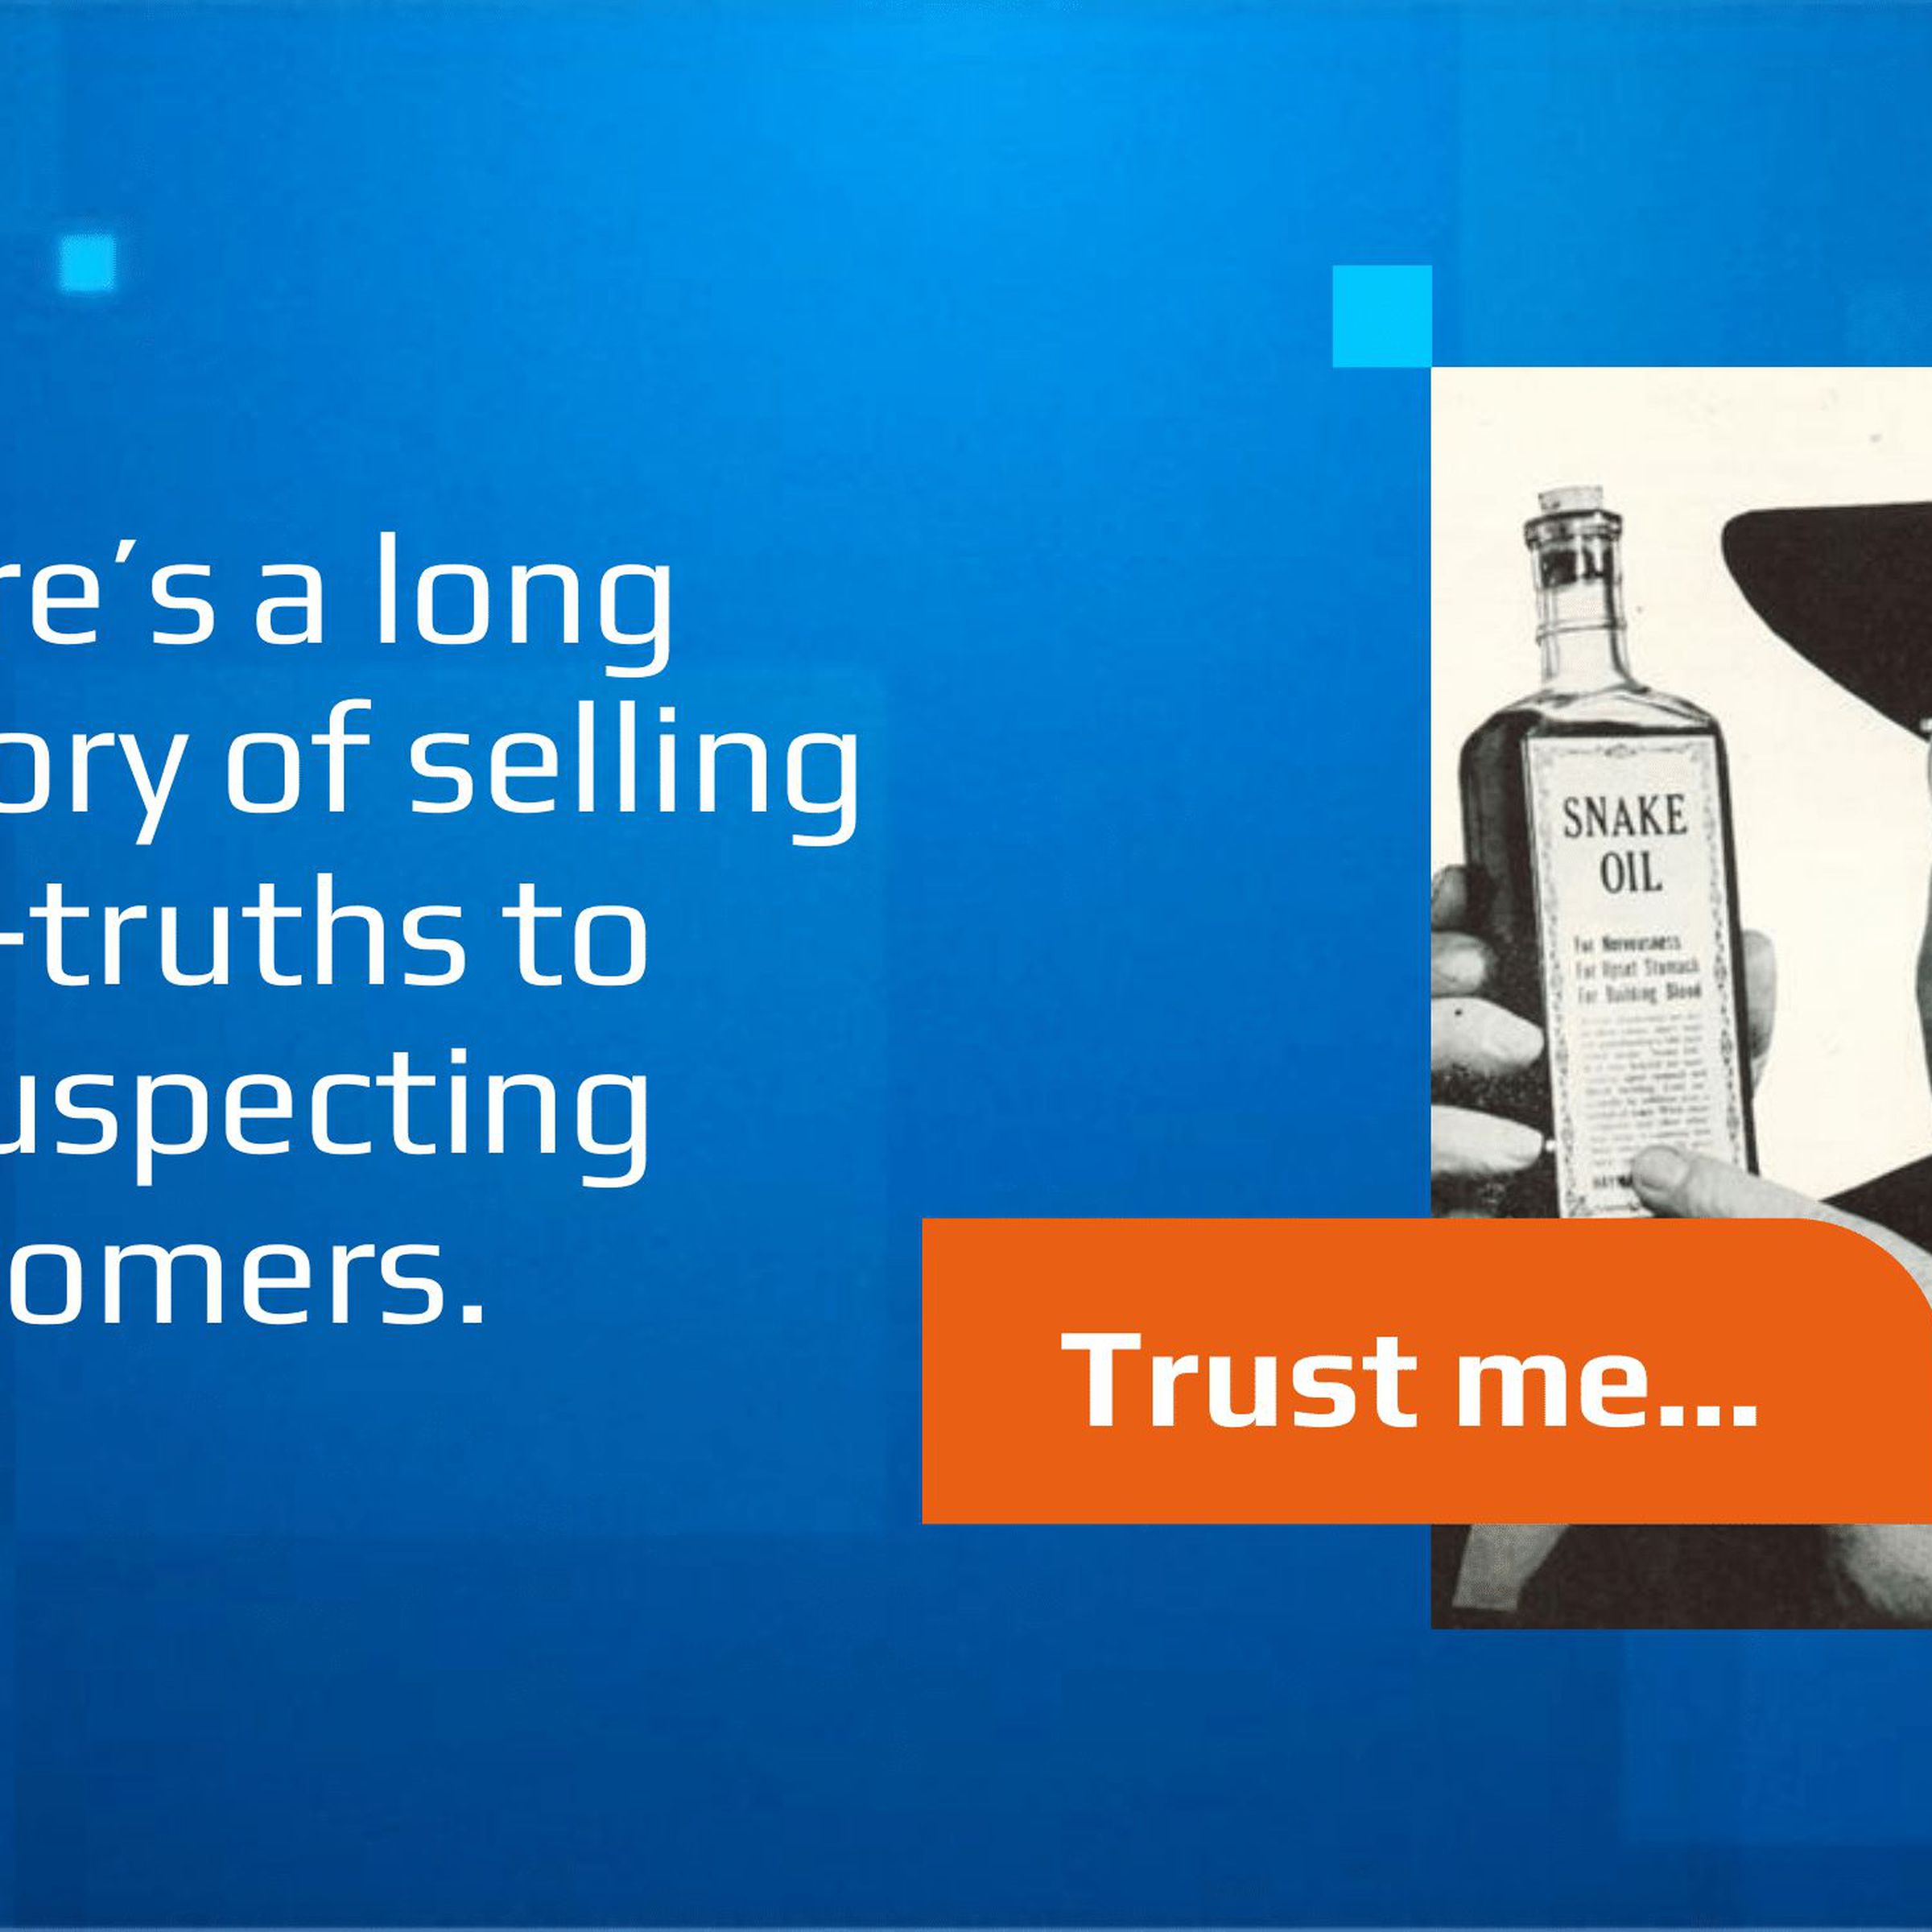 A slide in an Intel presentation with an image of snake oil salesperson